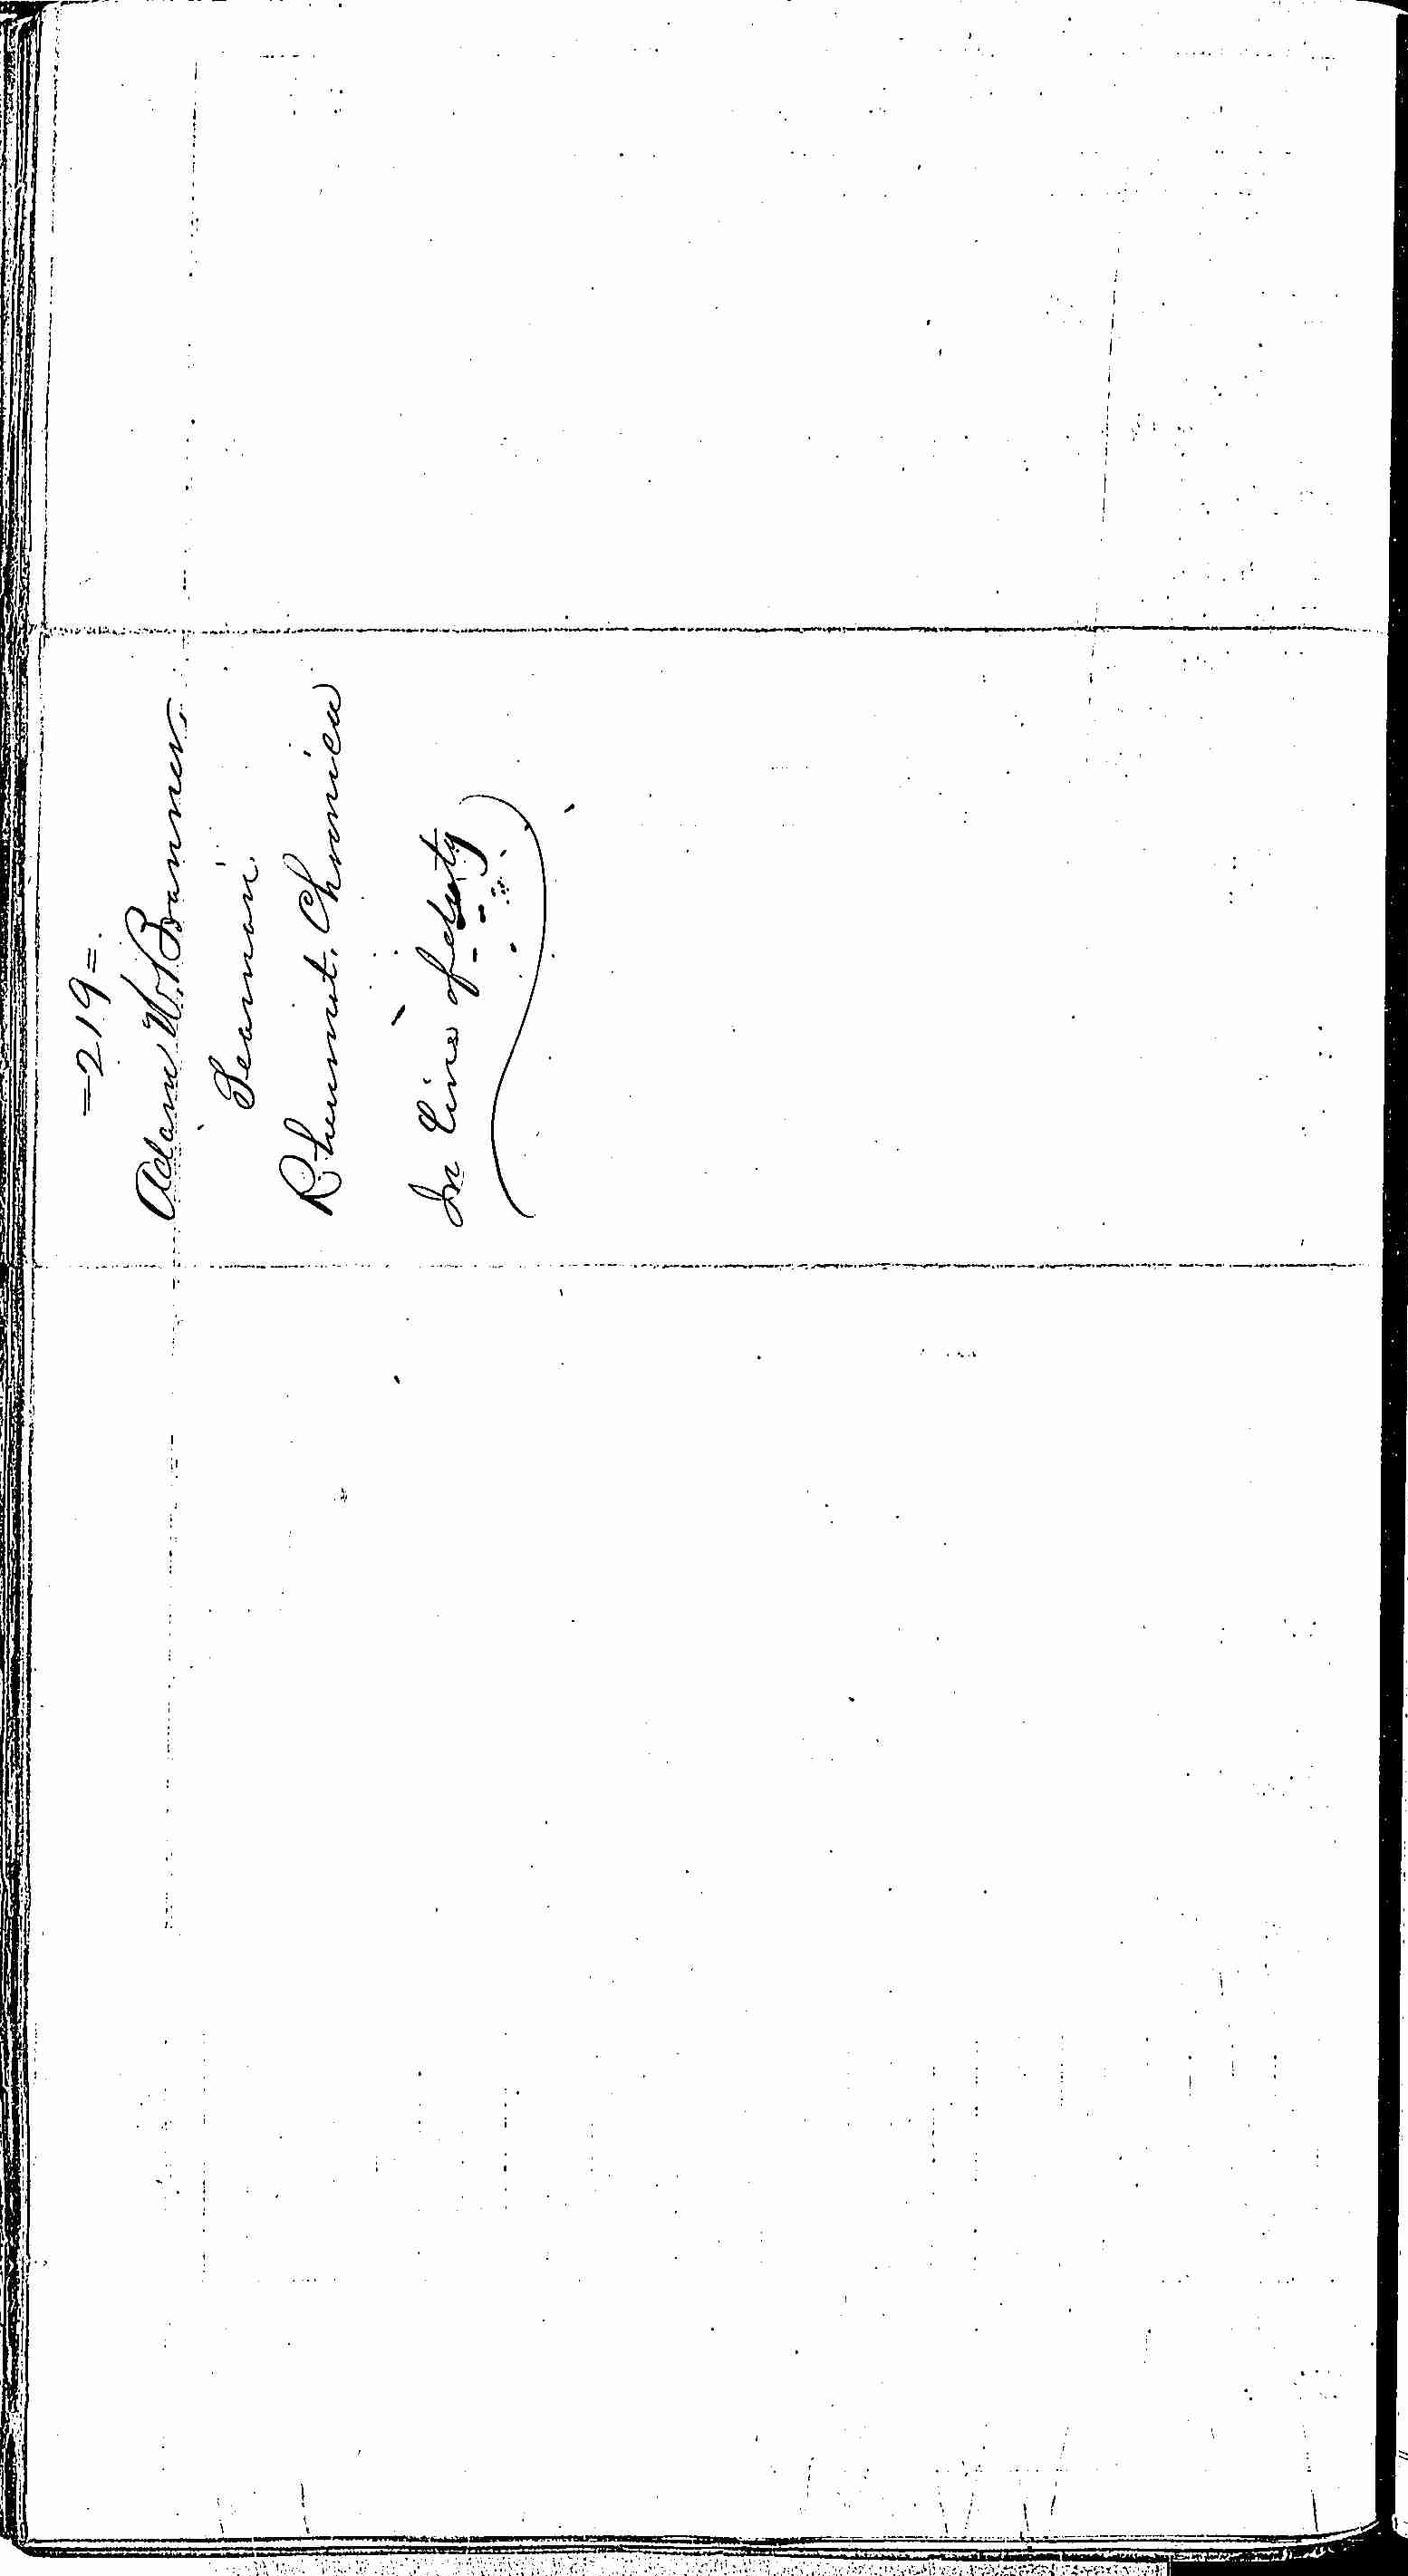 Entry for Adam M. Branner (page 2 of 2) in the log Hospital Tickets and Case Papers - Naval Hospital - Washington, D.C. - 1866-68